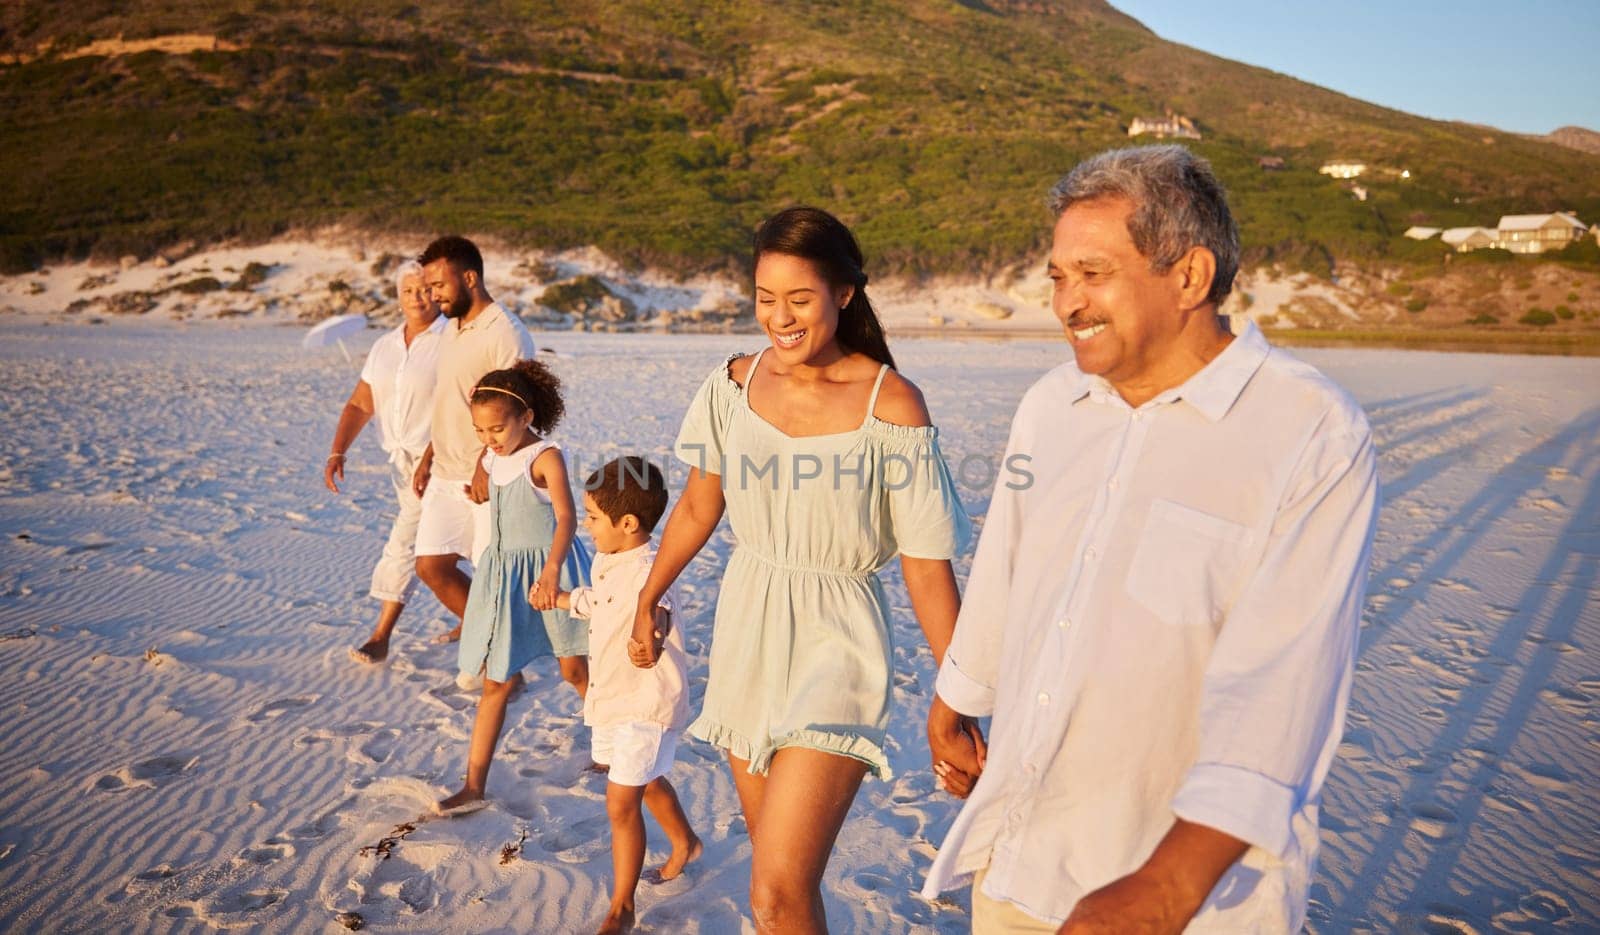 Big family, holding hands or happy kids at sea walking with grandparents on holiday vacation together. Dad, mom or children siblings bonding or smiling with grandmother or grandfather on beach sand by YuriArcurs